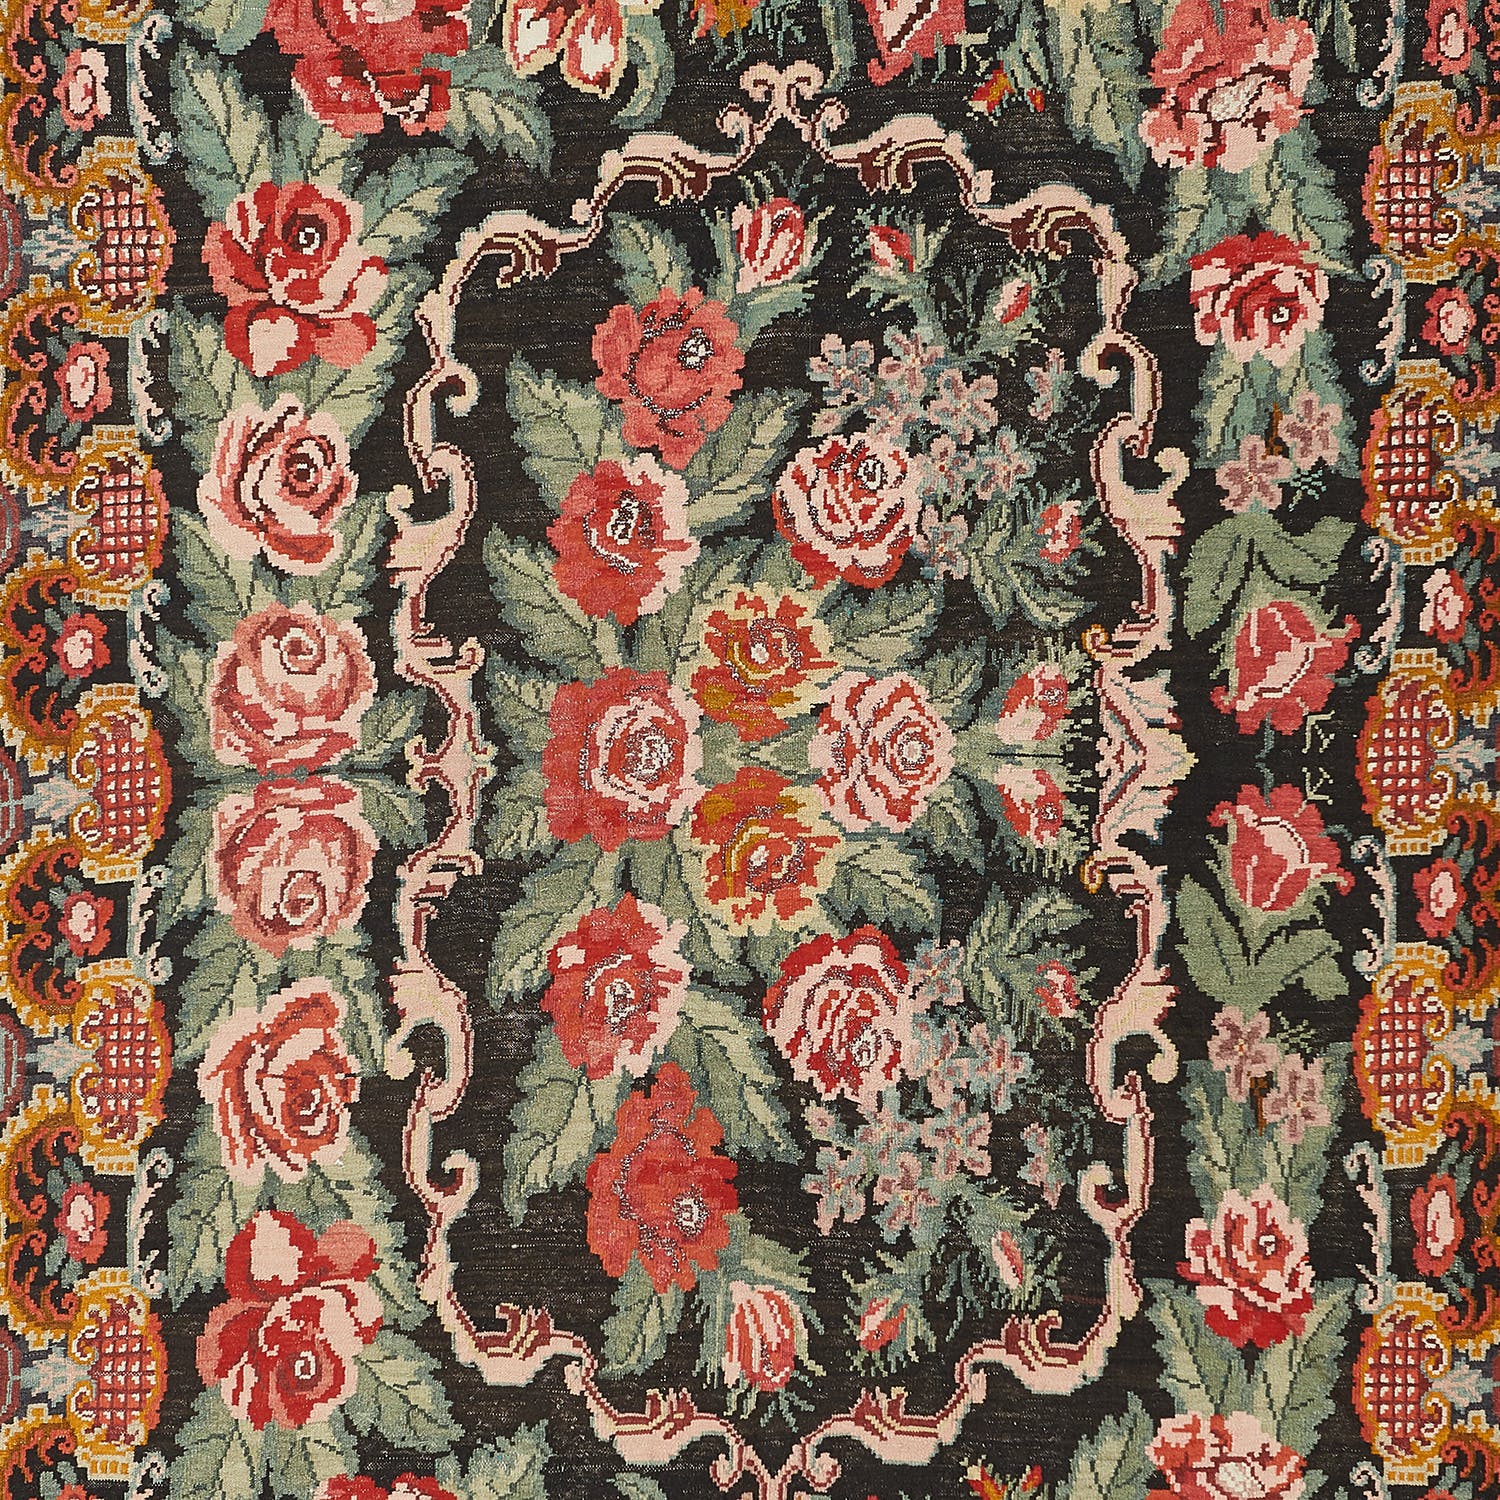 Hand-crafted rug with intricate floral pattern in shades of red